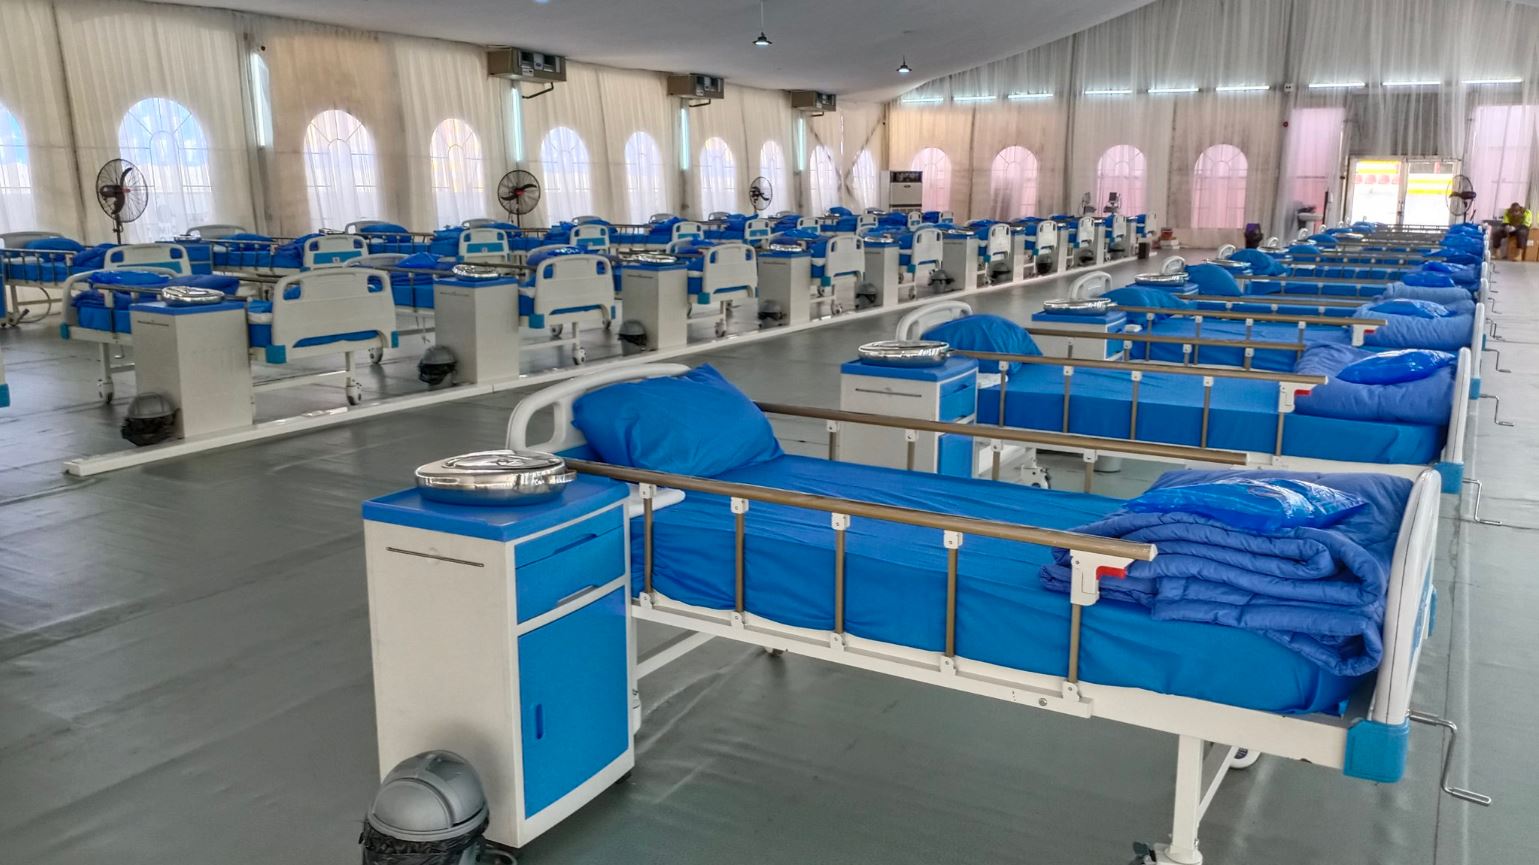 One of the isolation centres in Lagos [TVC]